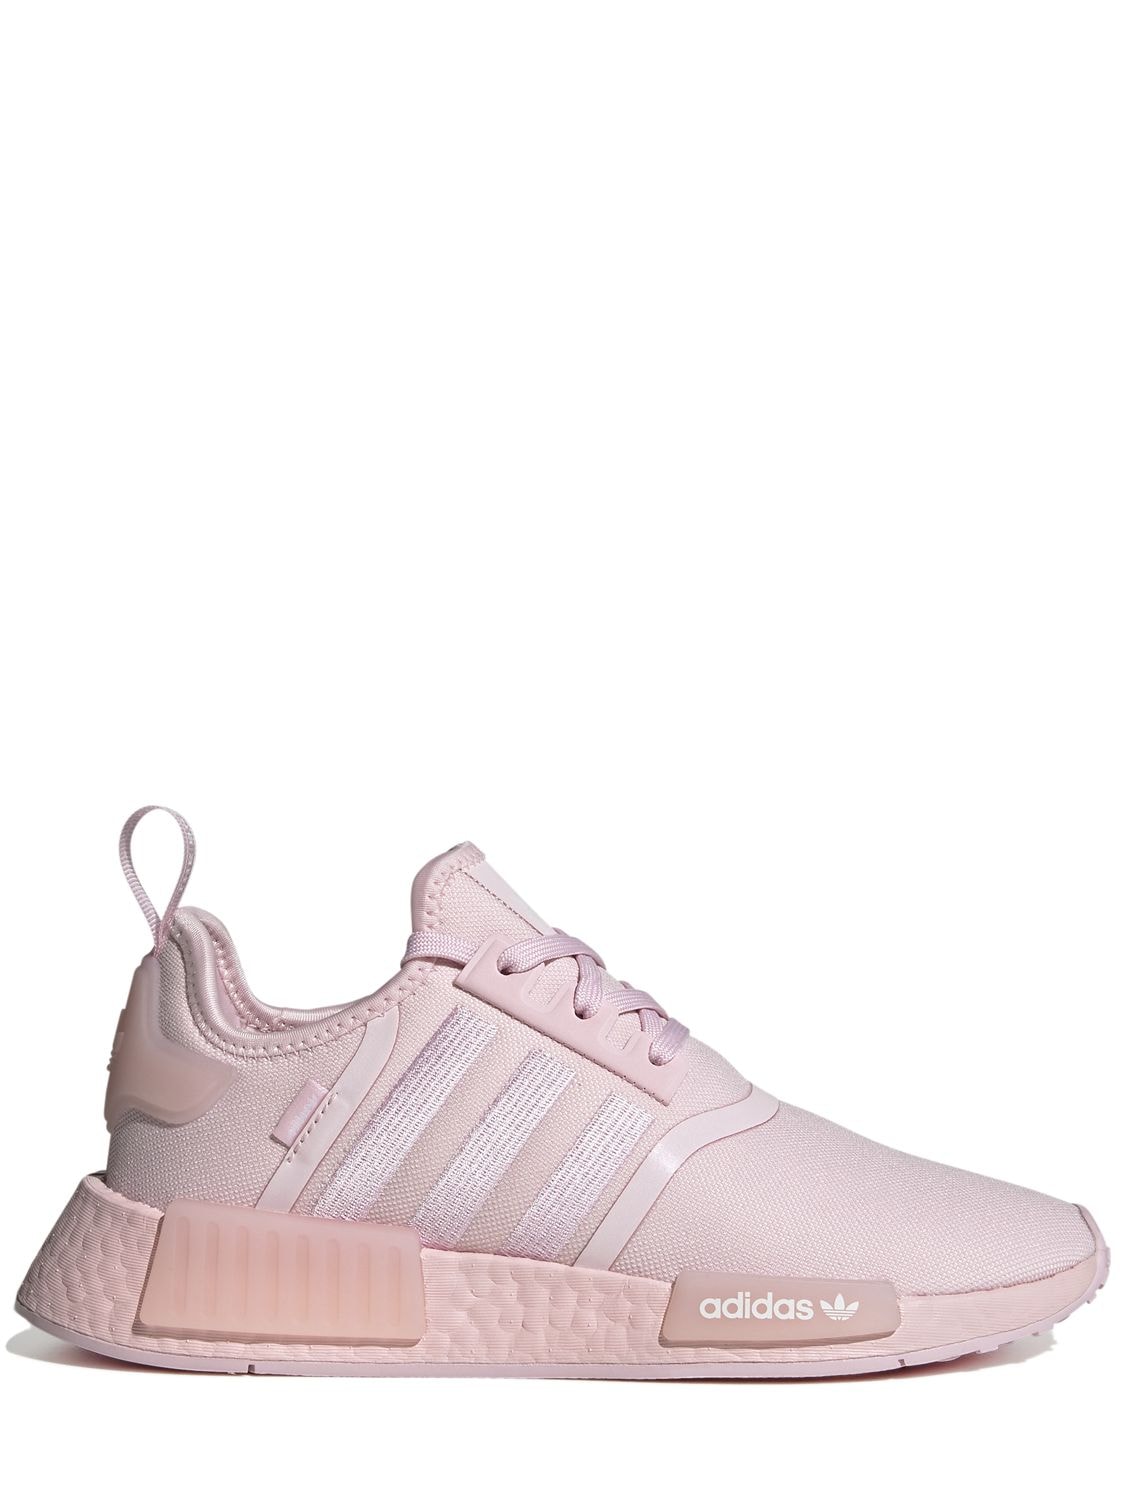 Nmd R1 Sneakers – WOMEN > SHOES > SNEAKERS